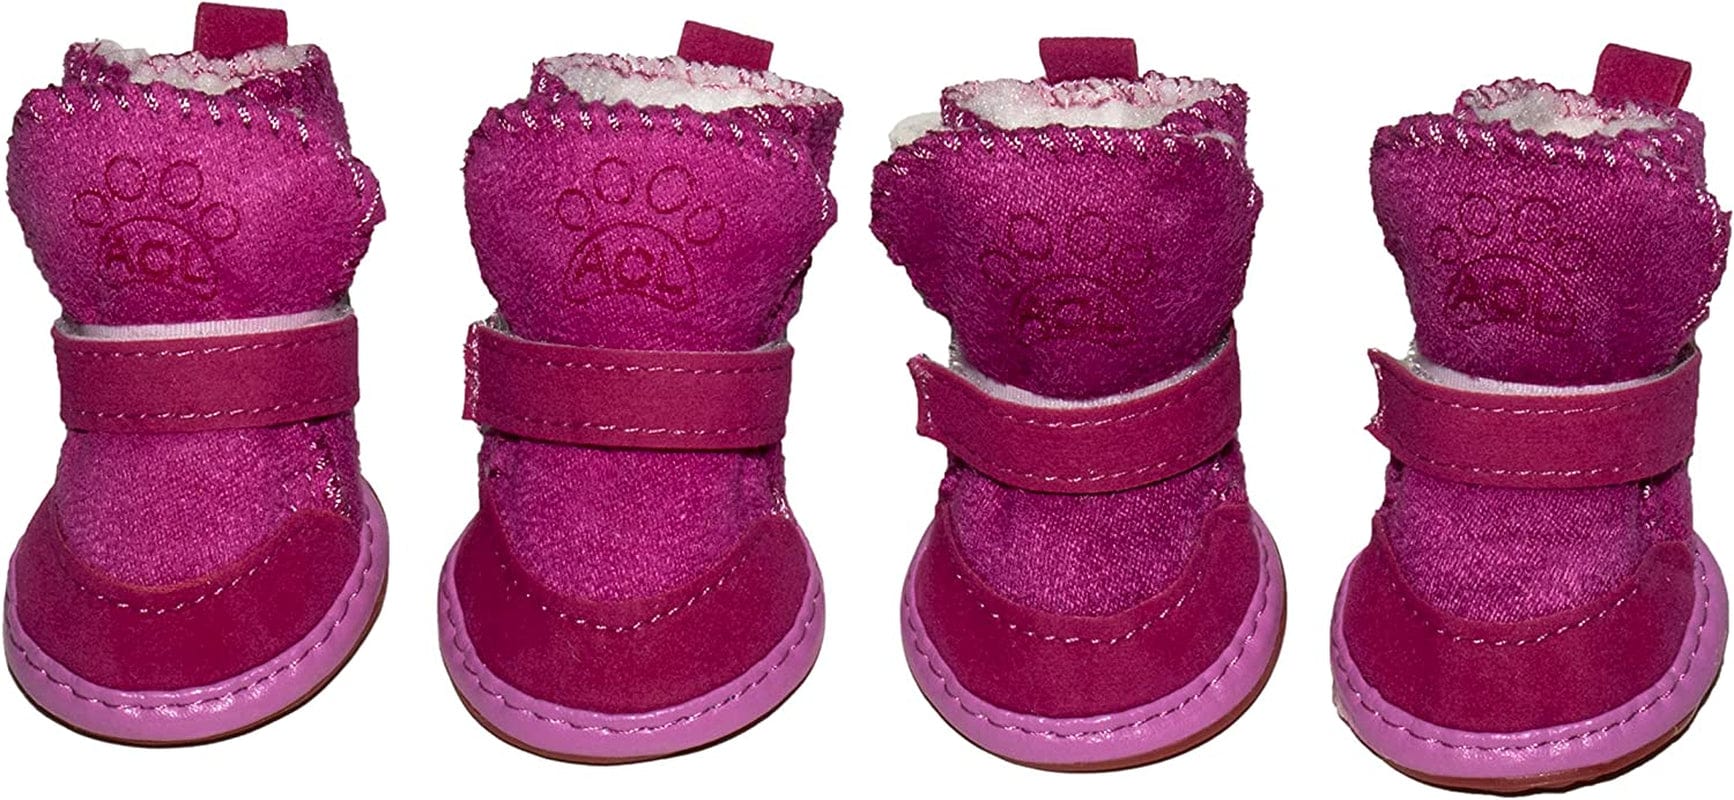 Small Dog Winter Booties, Cold Weahter Dog Shoes for Small Dogs, Boots for Cats, Yorkie, Chihuahua Cozy Boots Purple Size 4